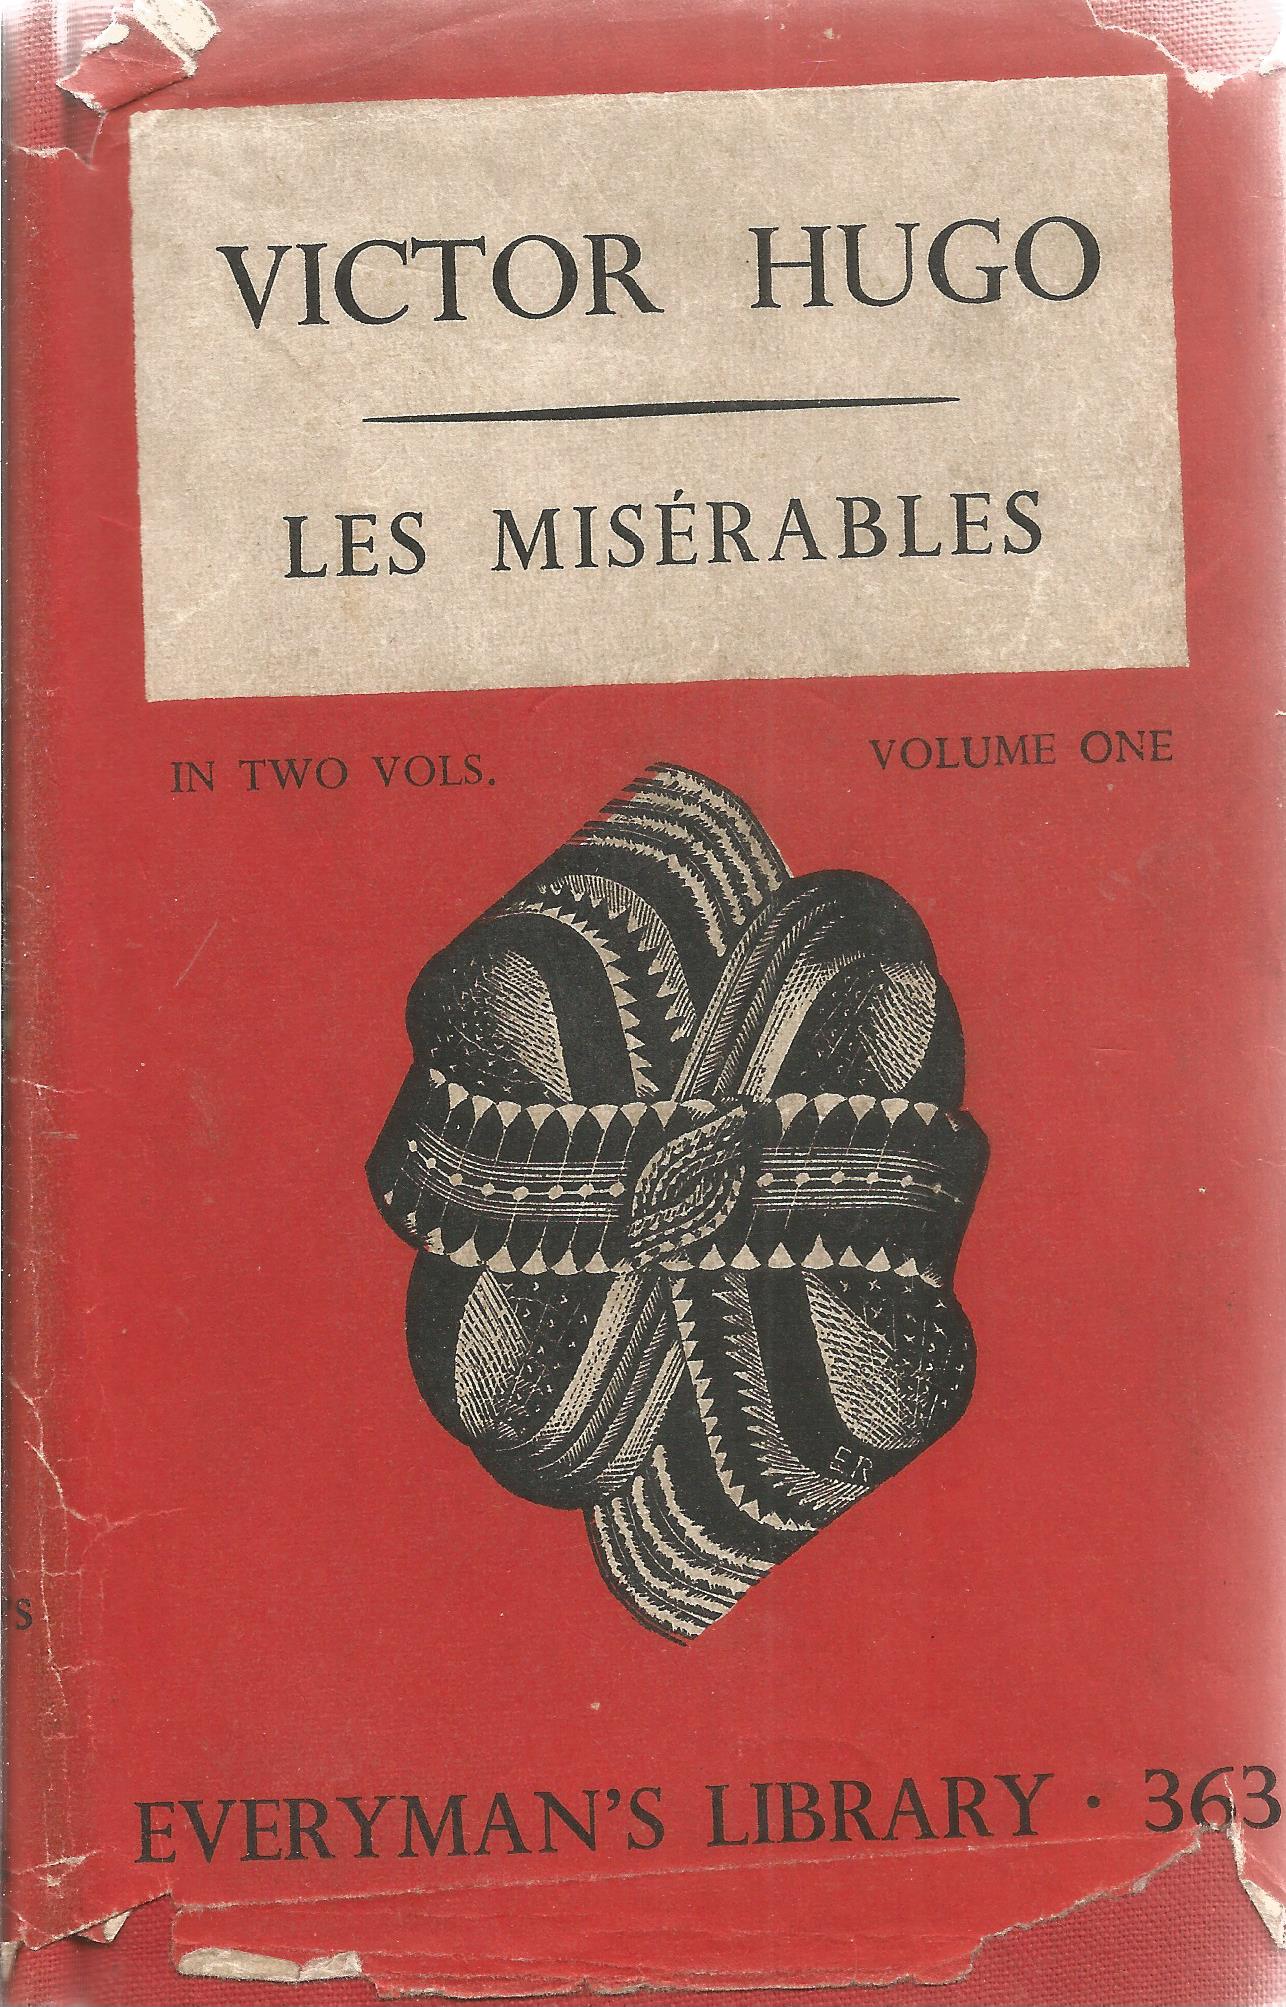 Les Miserables Volume one by Victor Hugo Hardback Book translated in 2 Vol's 1947 published by J M